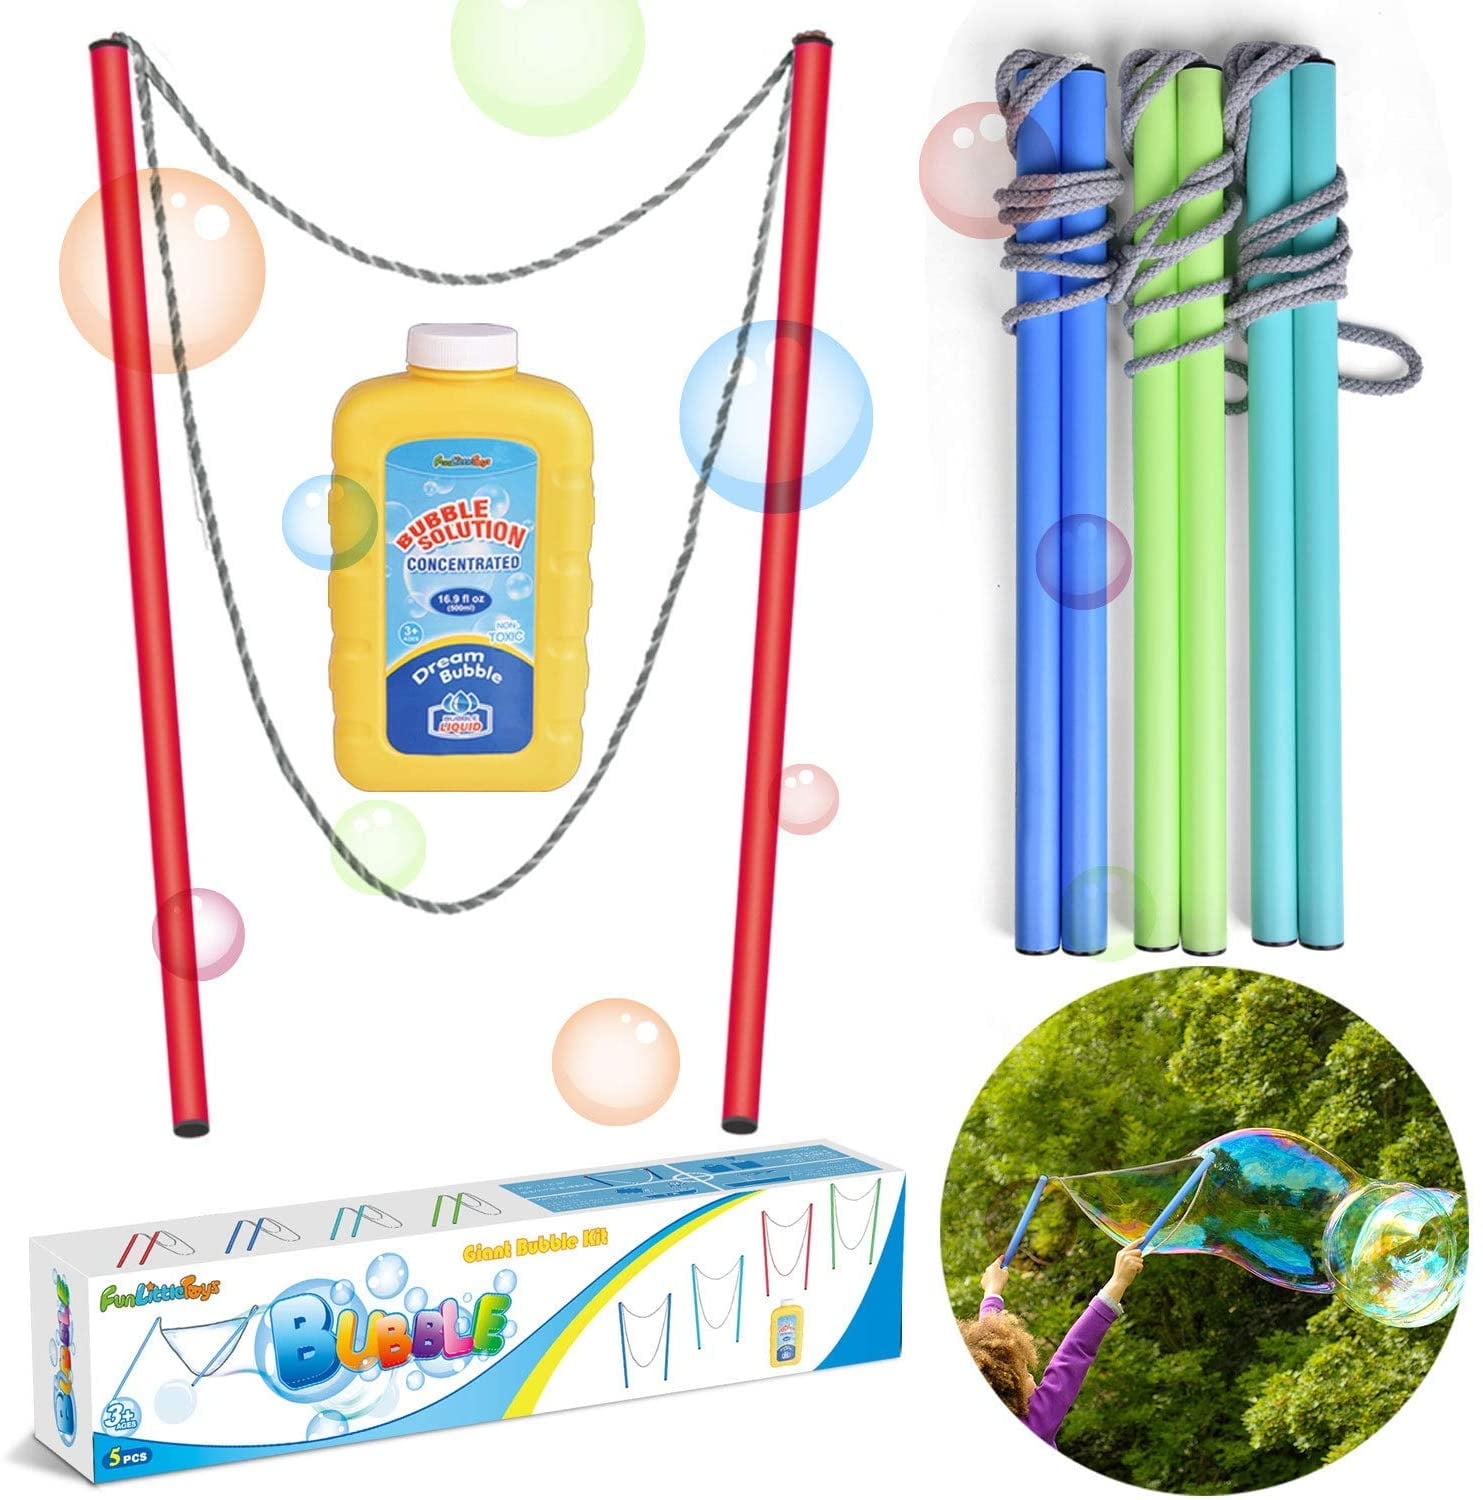 Details about   Bubble Outdoor Jumbo Garden Toy Game Children Maker Wand Blower gifts I0M9 